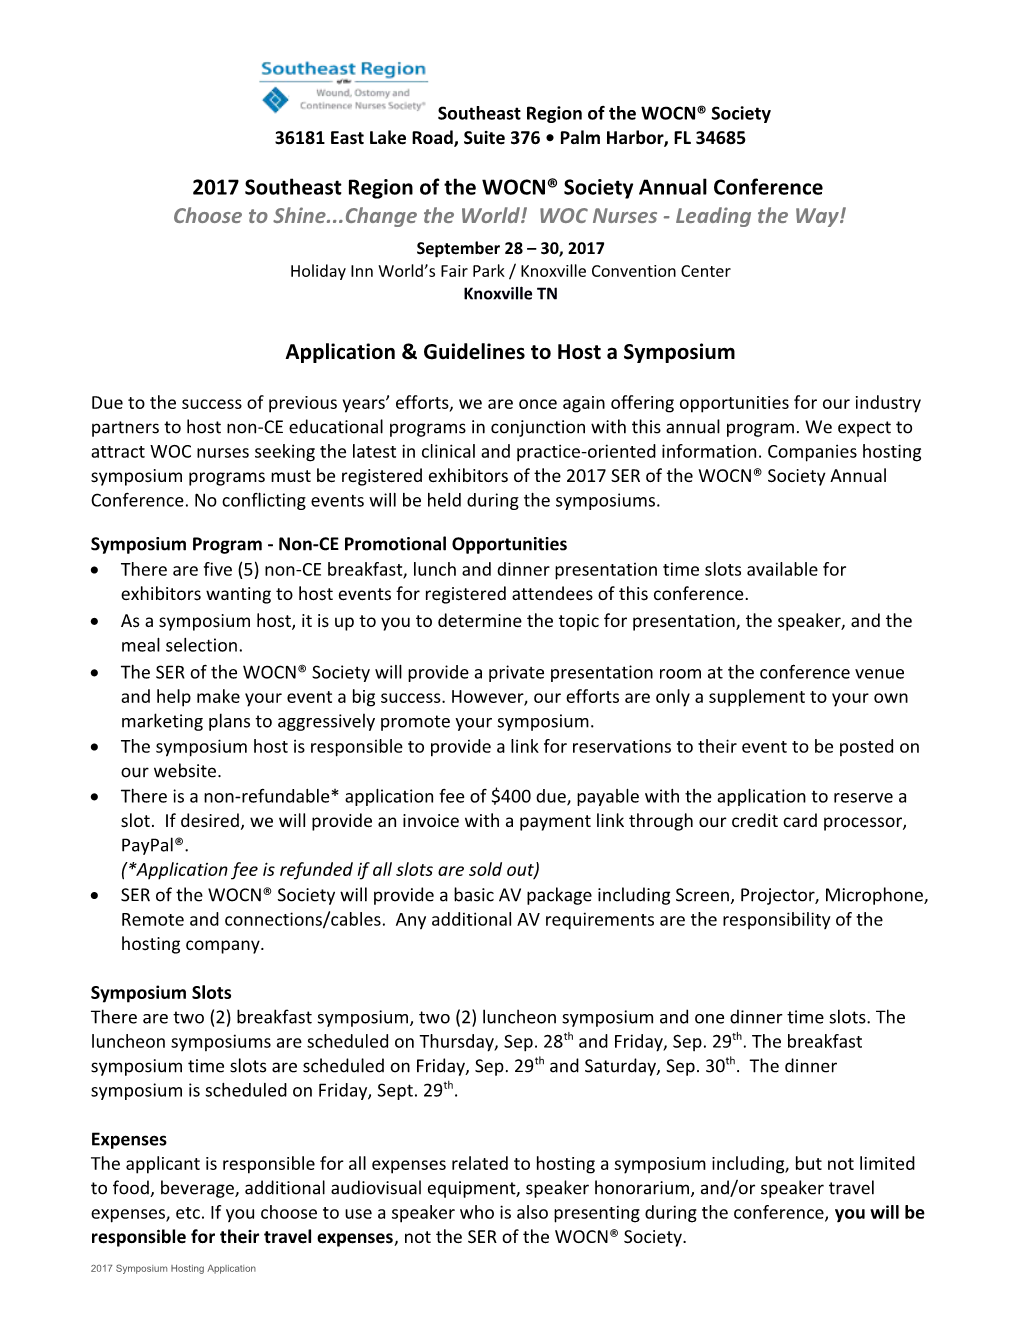 2017 Southeast Region of the WOCN Society Annual Conference